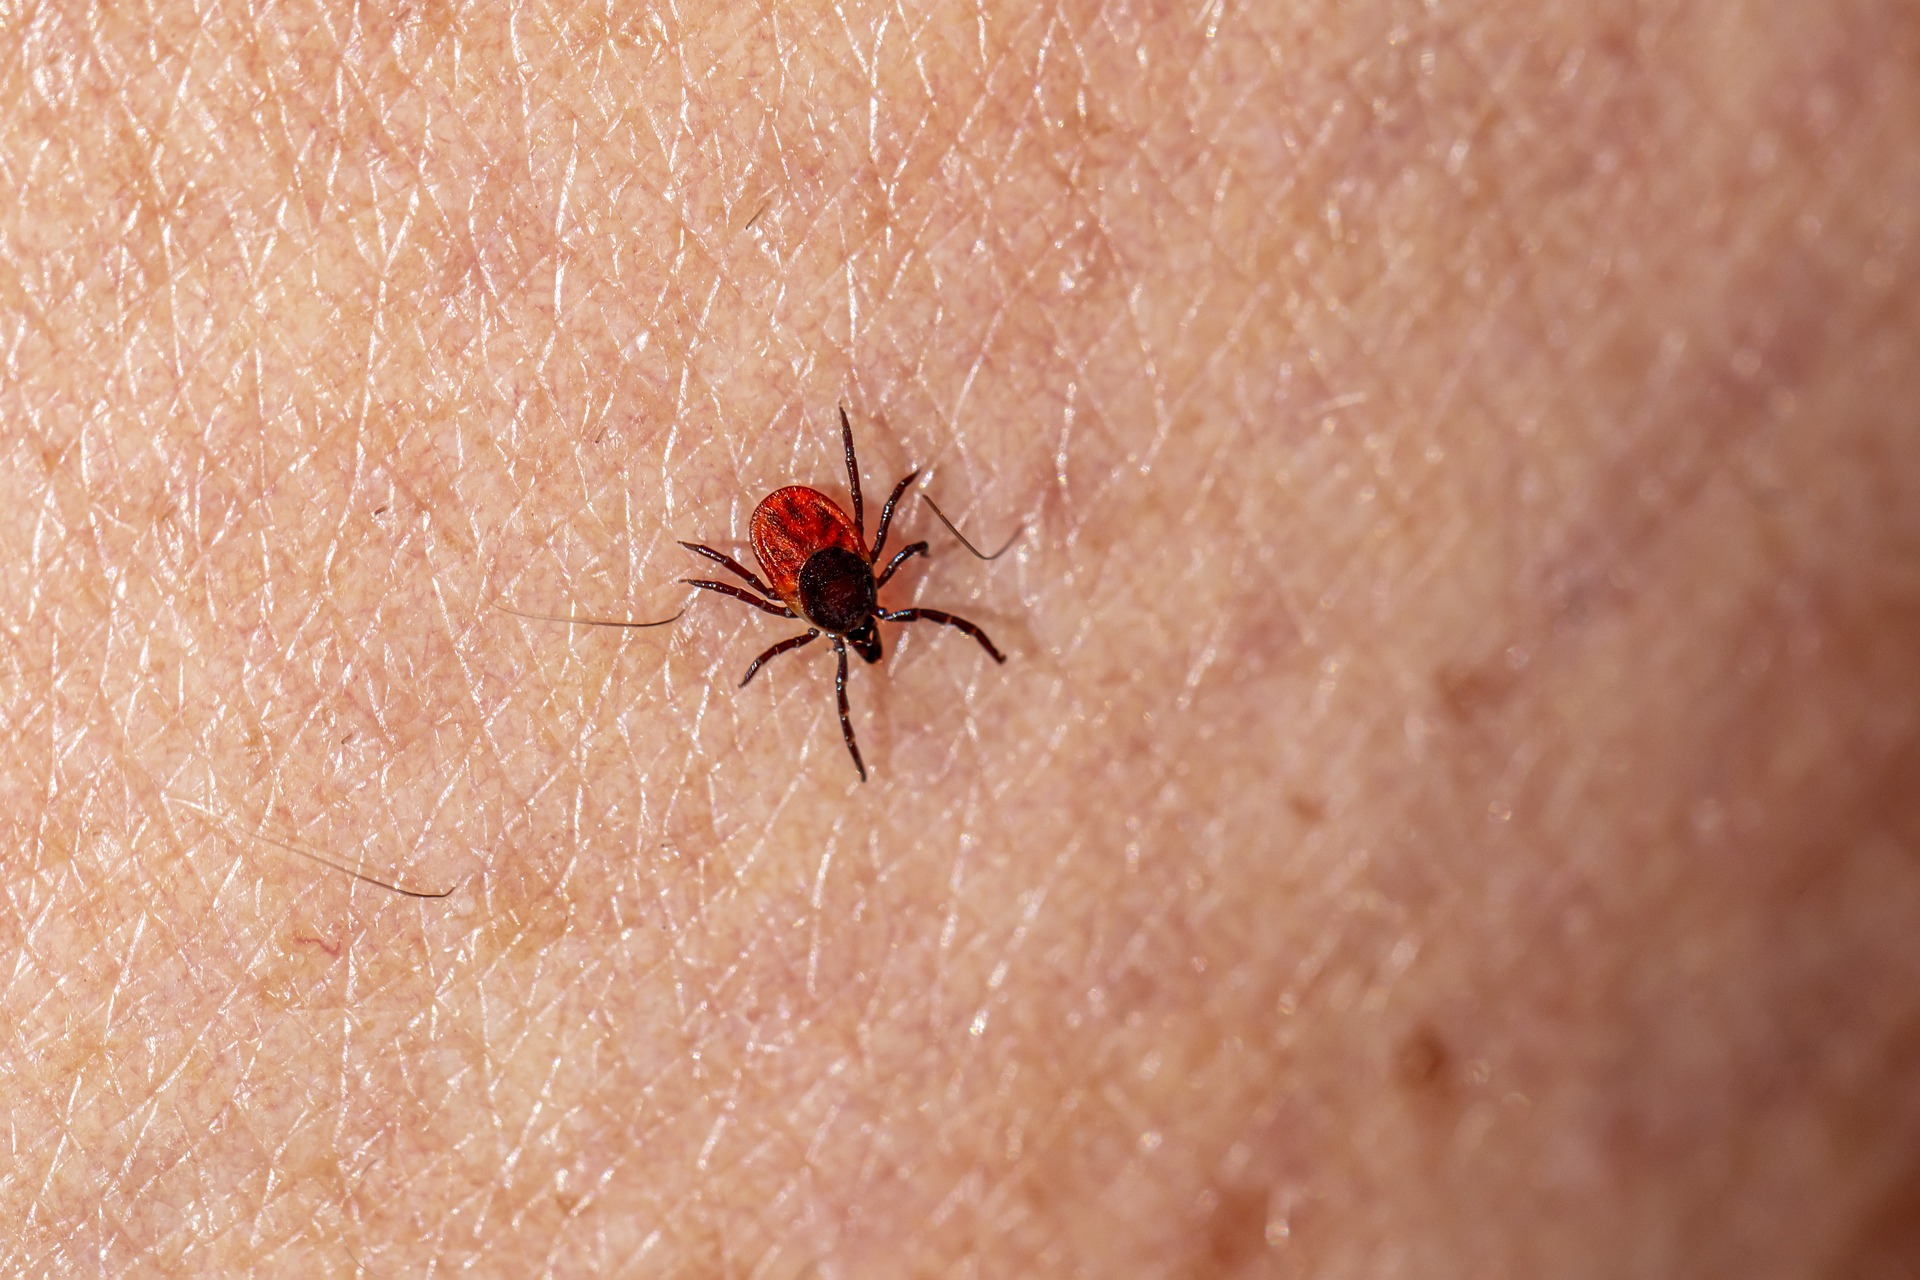 A very small tick insect about the size of a fingernail on top of human skin. The tick has eight black legs, four on each side of its body. The insect's body is oval-shaped, with half its body red and black, and the other half just black. The tick has a black, rectangular-shaped head attached to the black half of the body.